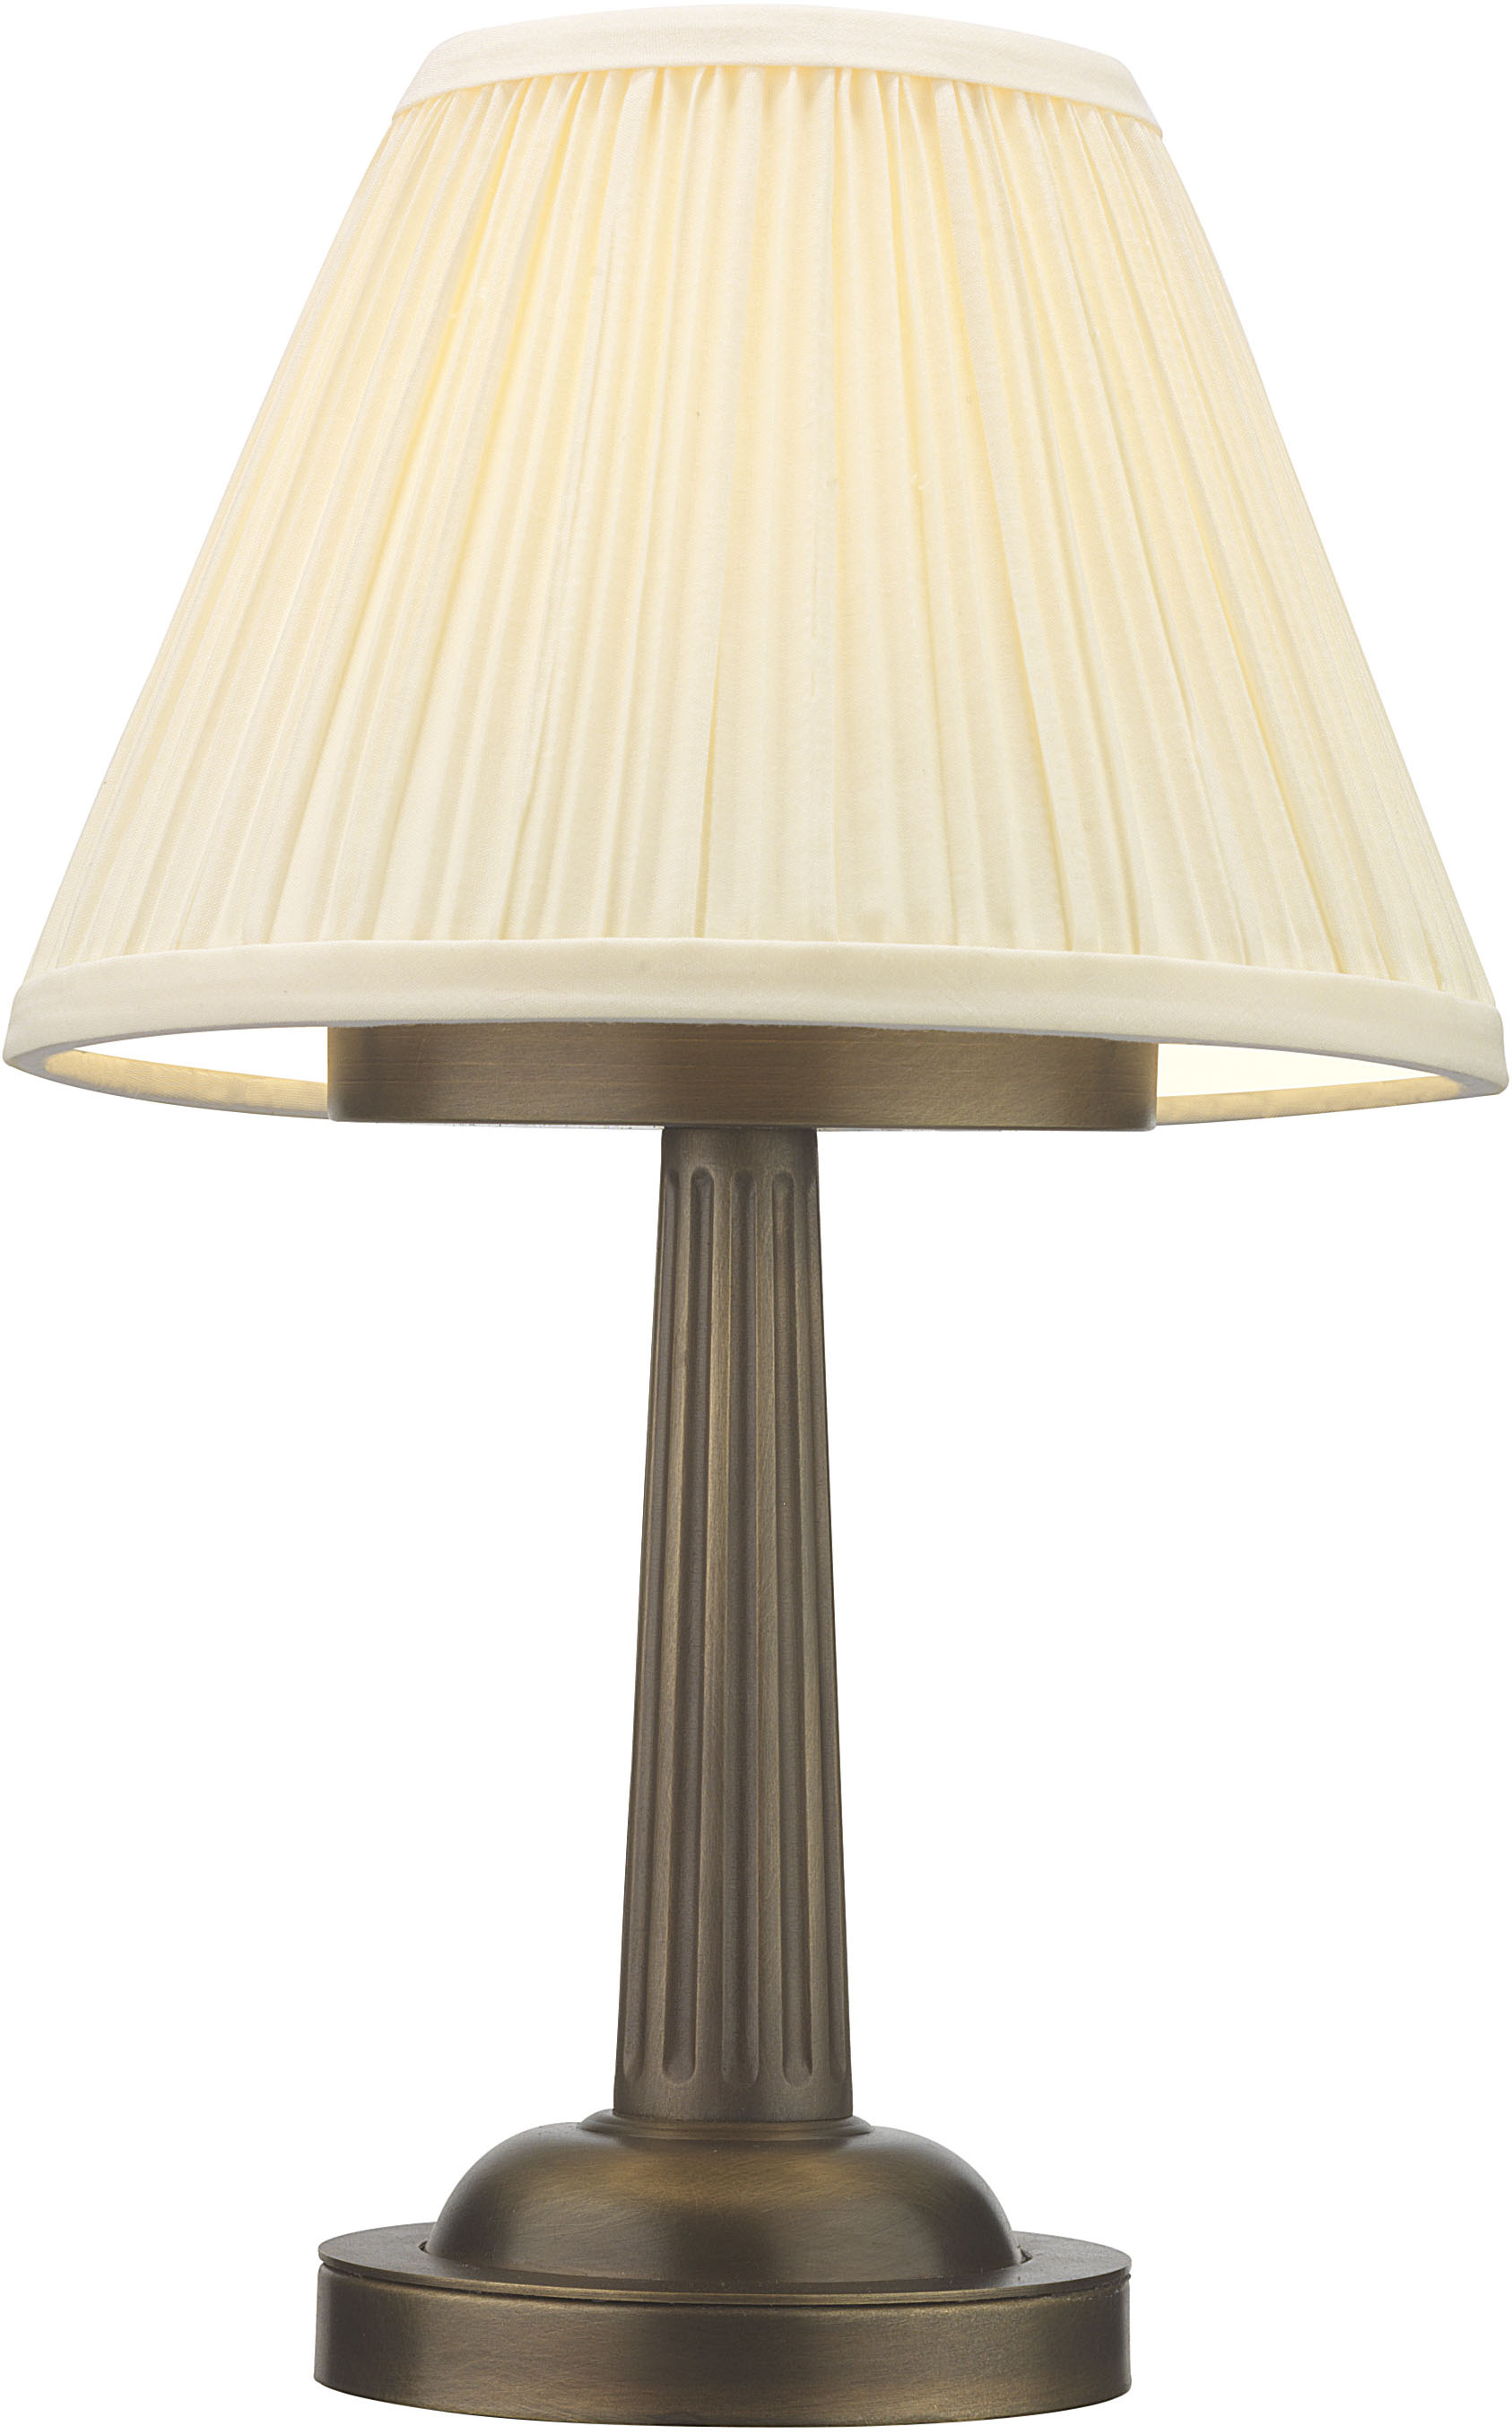 Our range of cordless lights includes the Lutton table lamp - an elegant, understated lamp made from Italian cast brass.